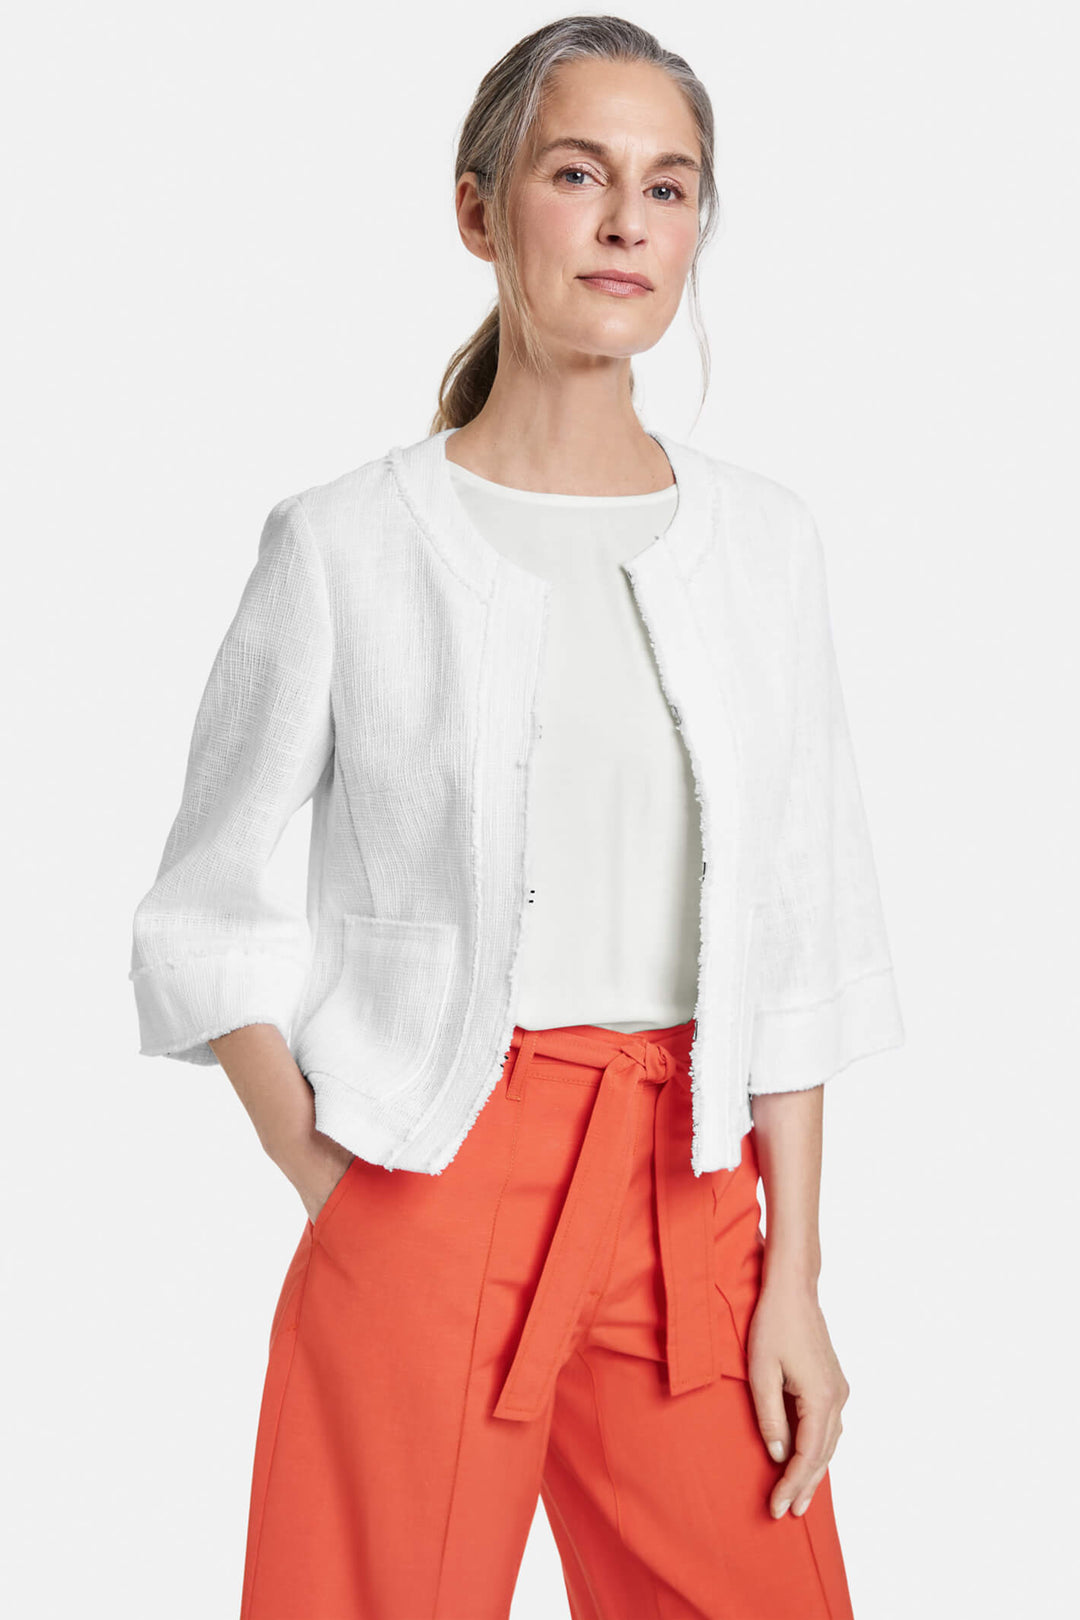 Gerry Weber 130040 White Lightweight Woven Jacket - Experience Boutique